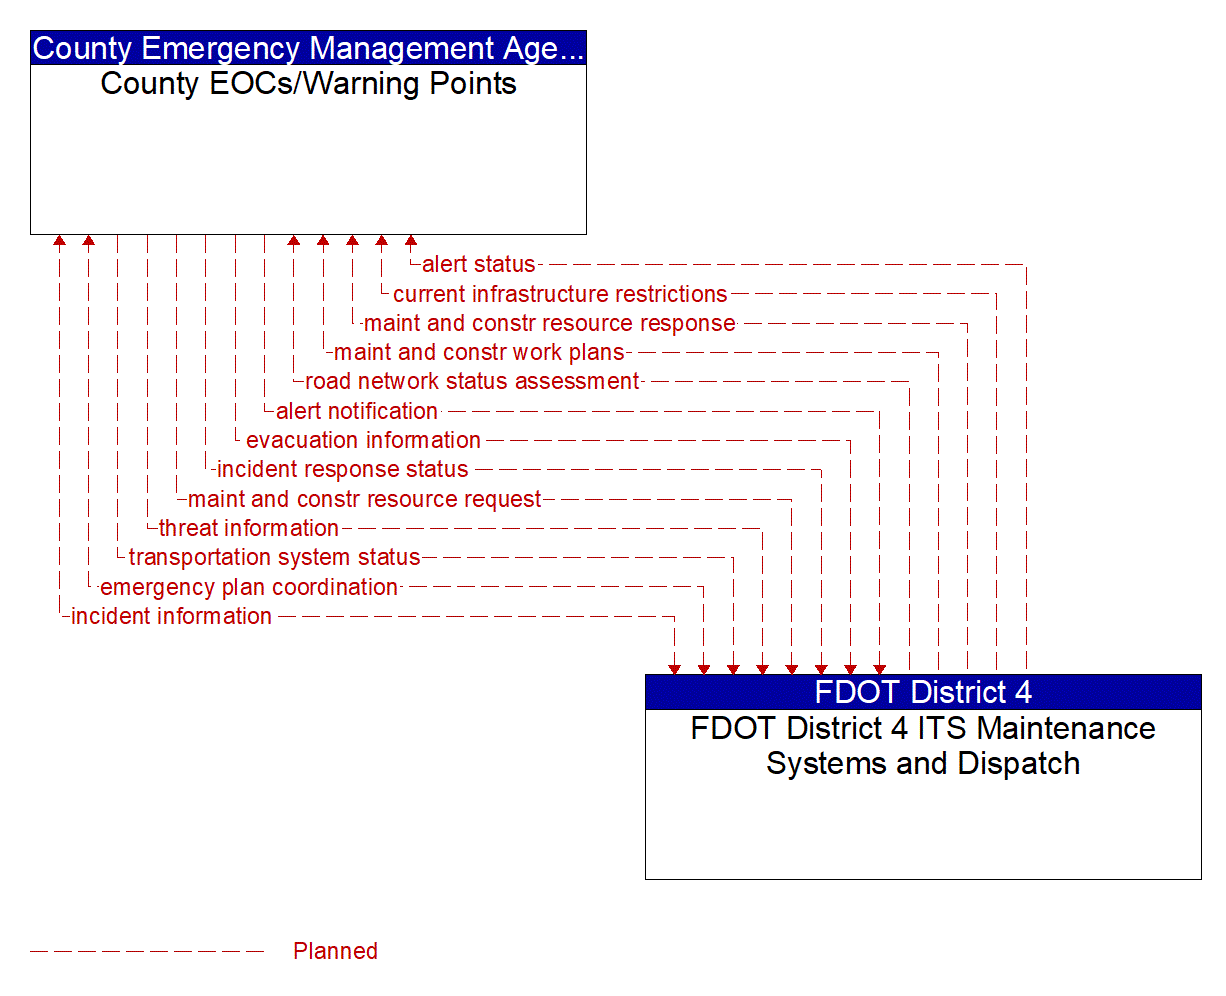 Architecture Flow Diagram: FDOT District 4 ITS Maintenance Systems and Dispatch <--> County EOCs/Warning Points